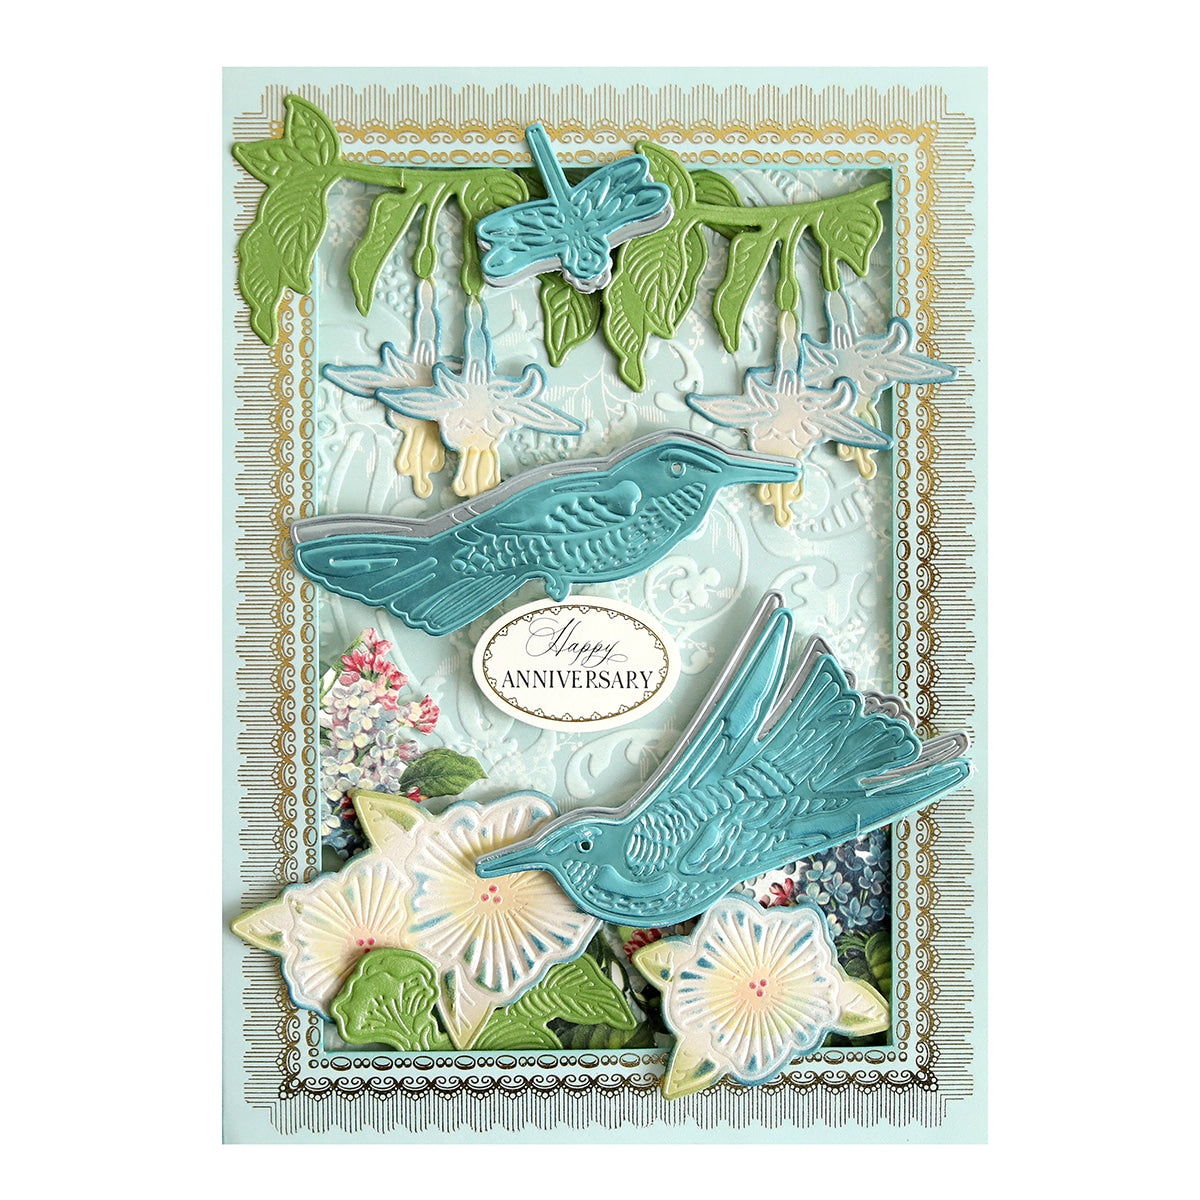 a card with two blue birds and flowers.